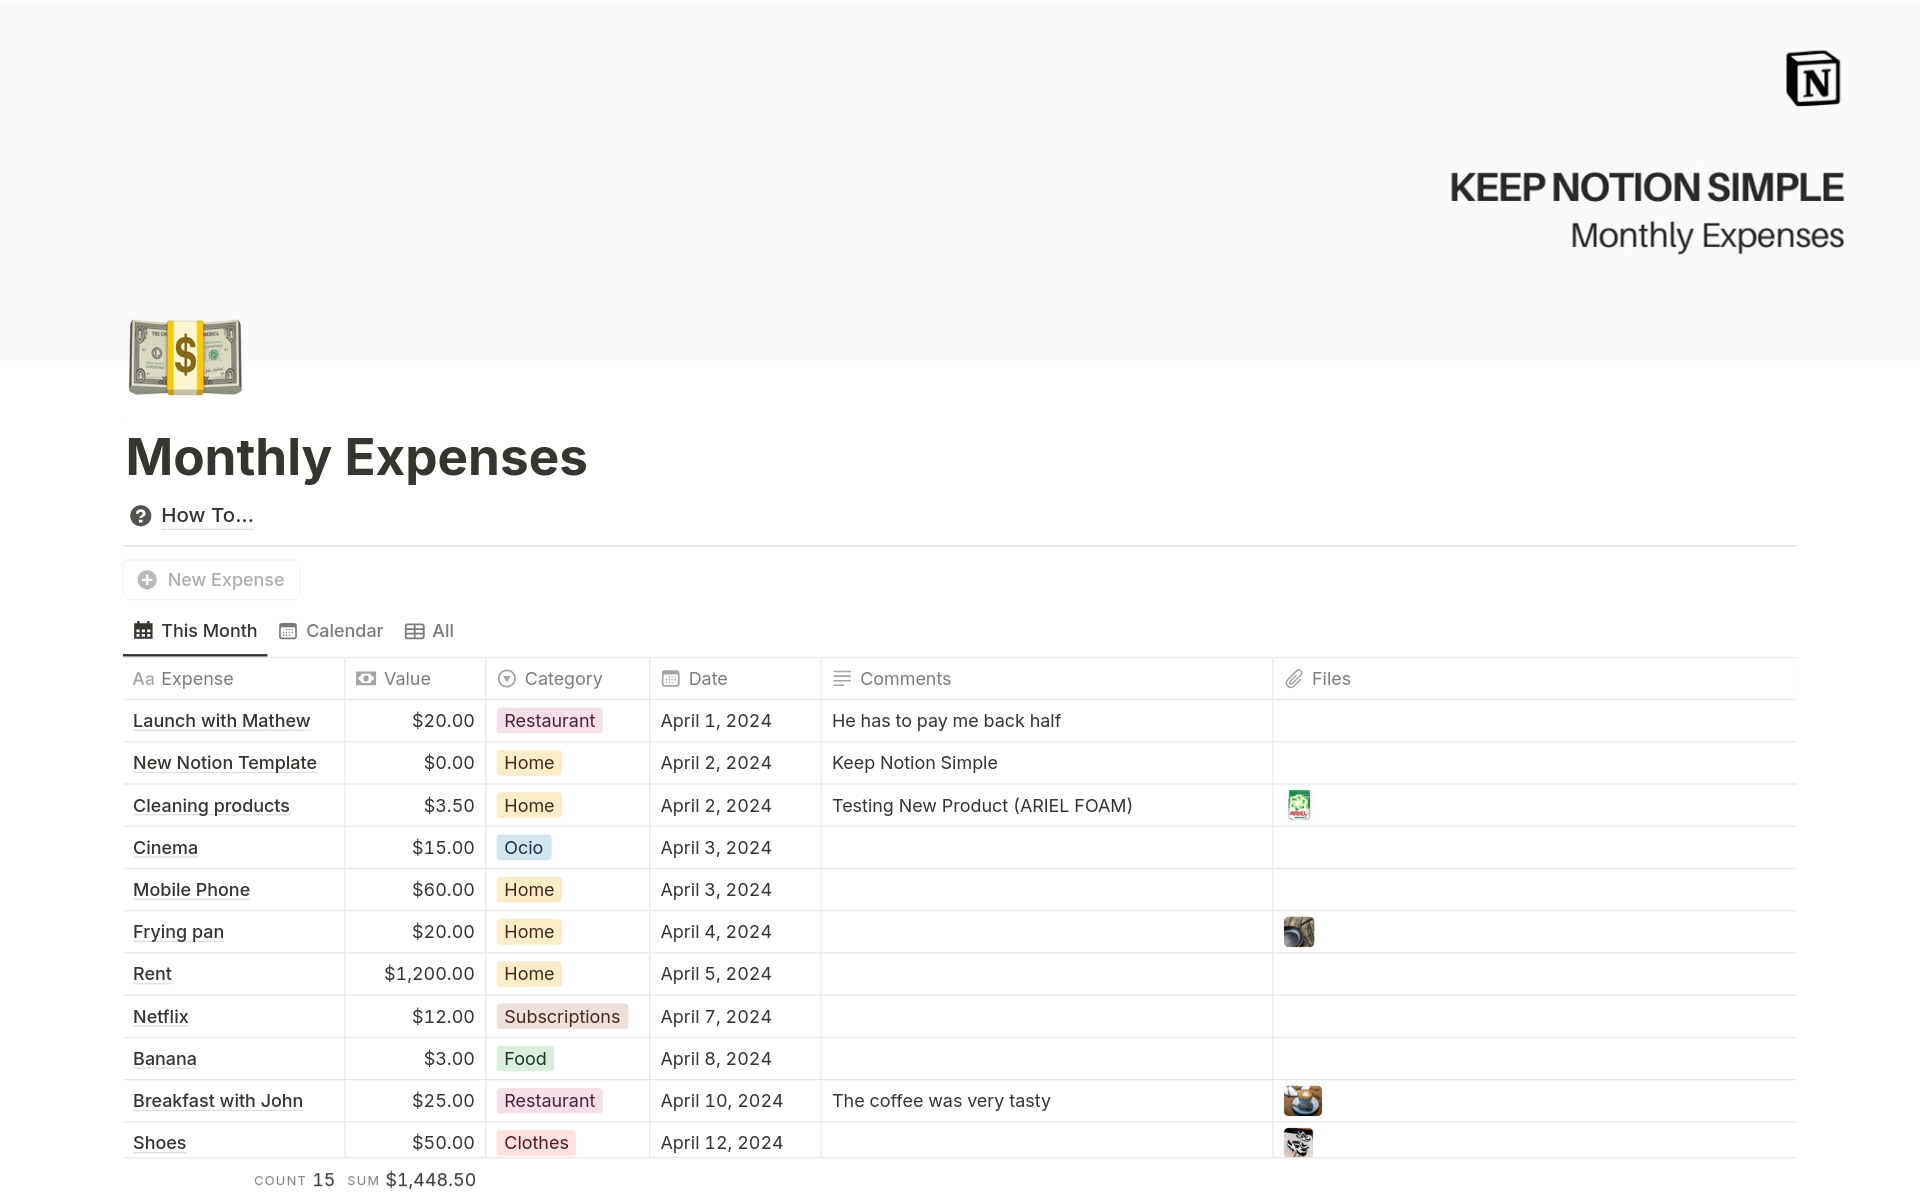 Take control of your finances with this Notion expense tracker! Easily log expenses, view spending by month, and get a comprehensive overview to improve your financial well-being. Quick-add button, categorization, and attachment options!